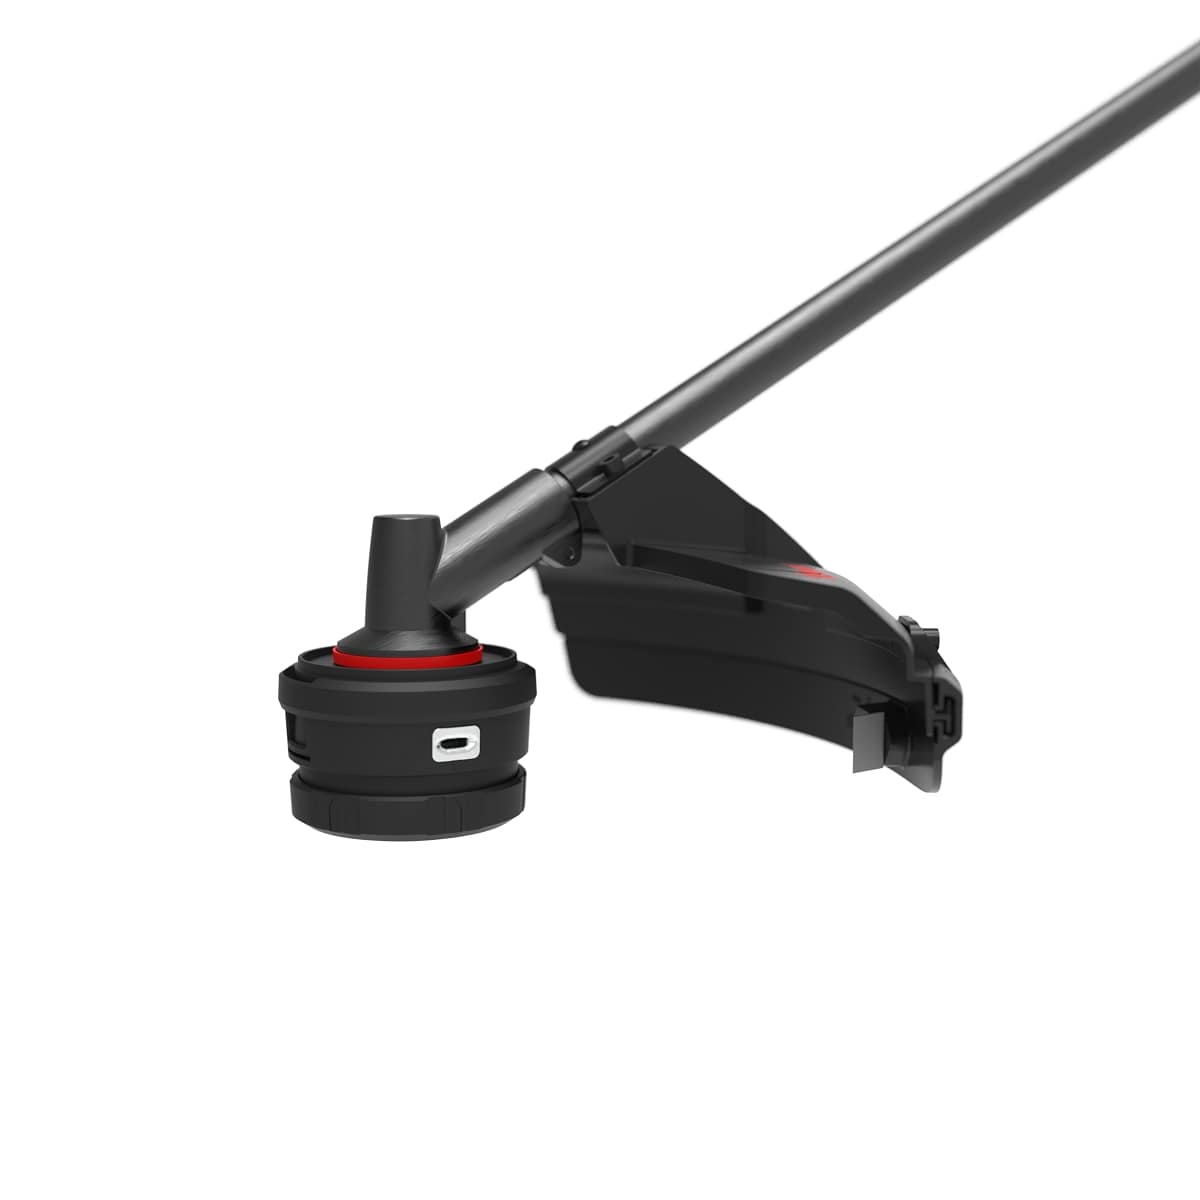 Kress KG163.9 60V Attachment Capable Grass Trimmer, Tool Only